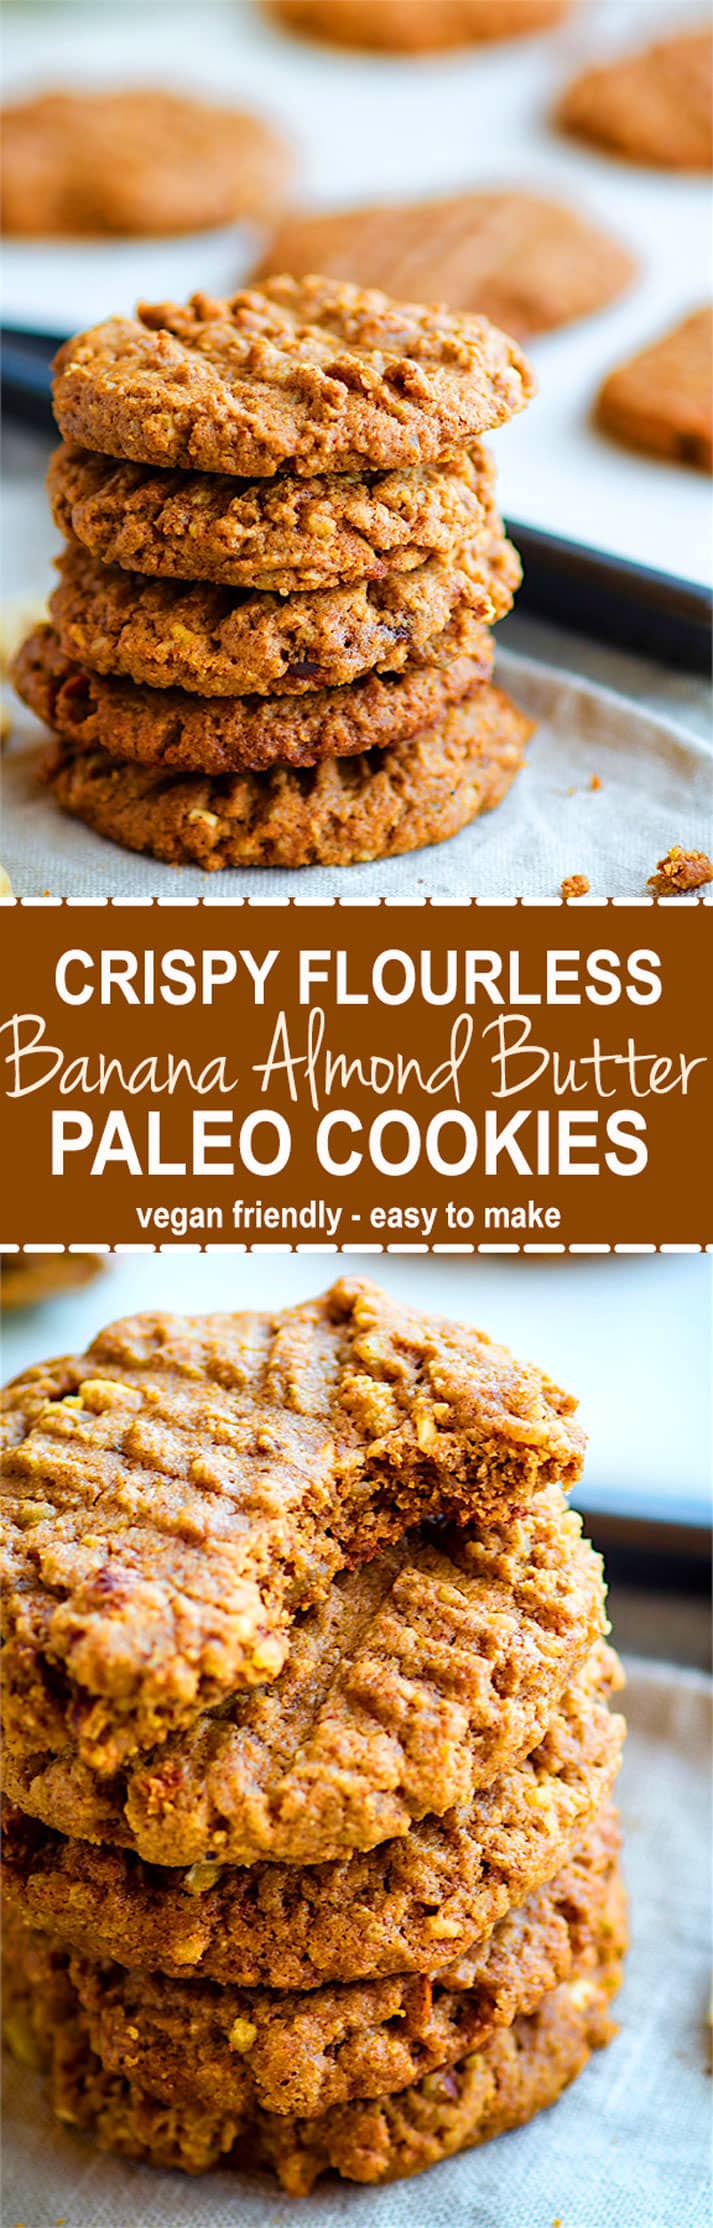 Crispy Flourless Banana Almond Butter Cookies. Healthy flourless almond butter cookies that only need a few ingredients to make! These flourless cookies are gluten free, paleo, and vegan friendly. Plus they TASTE AMAZING! Lightly sweetened with ground banana and perfectly nutty with an almond butter base.